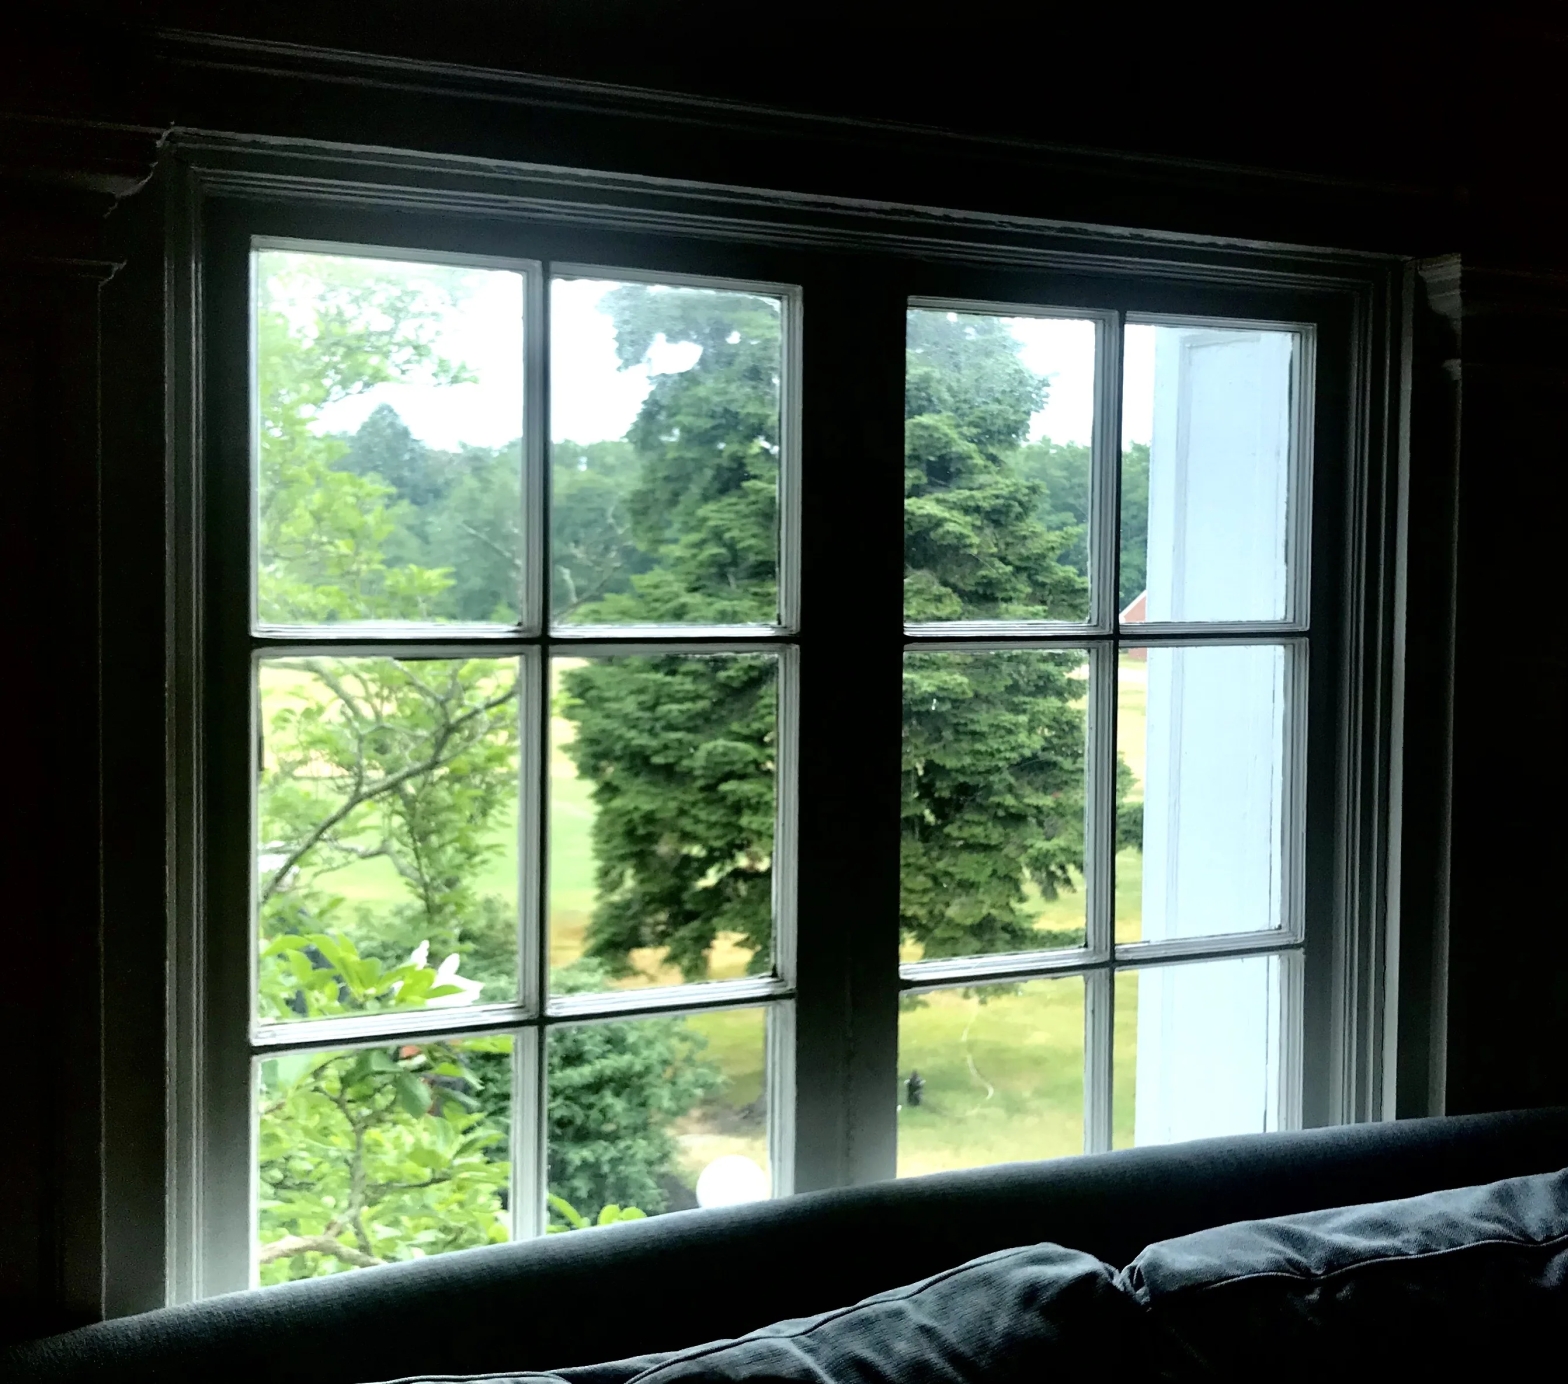 Photograph of a dark window, which overlooks a very green and very rainy lawn. Between the two windows, a tall tree is obscured.